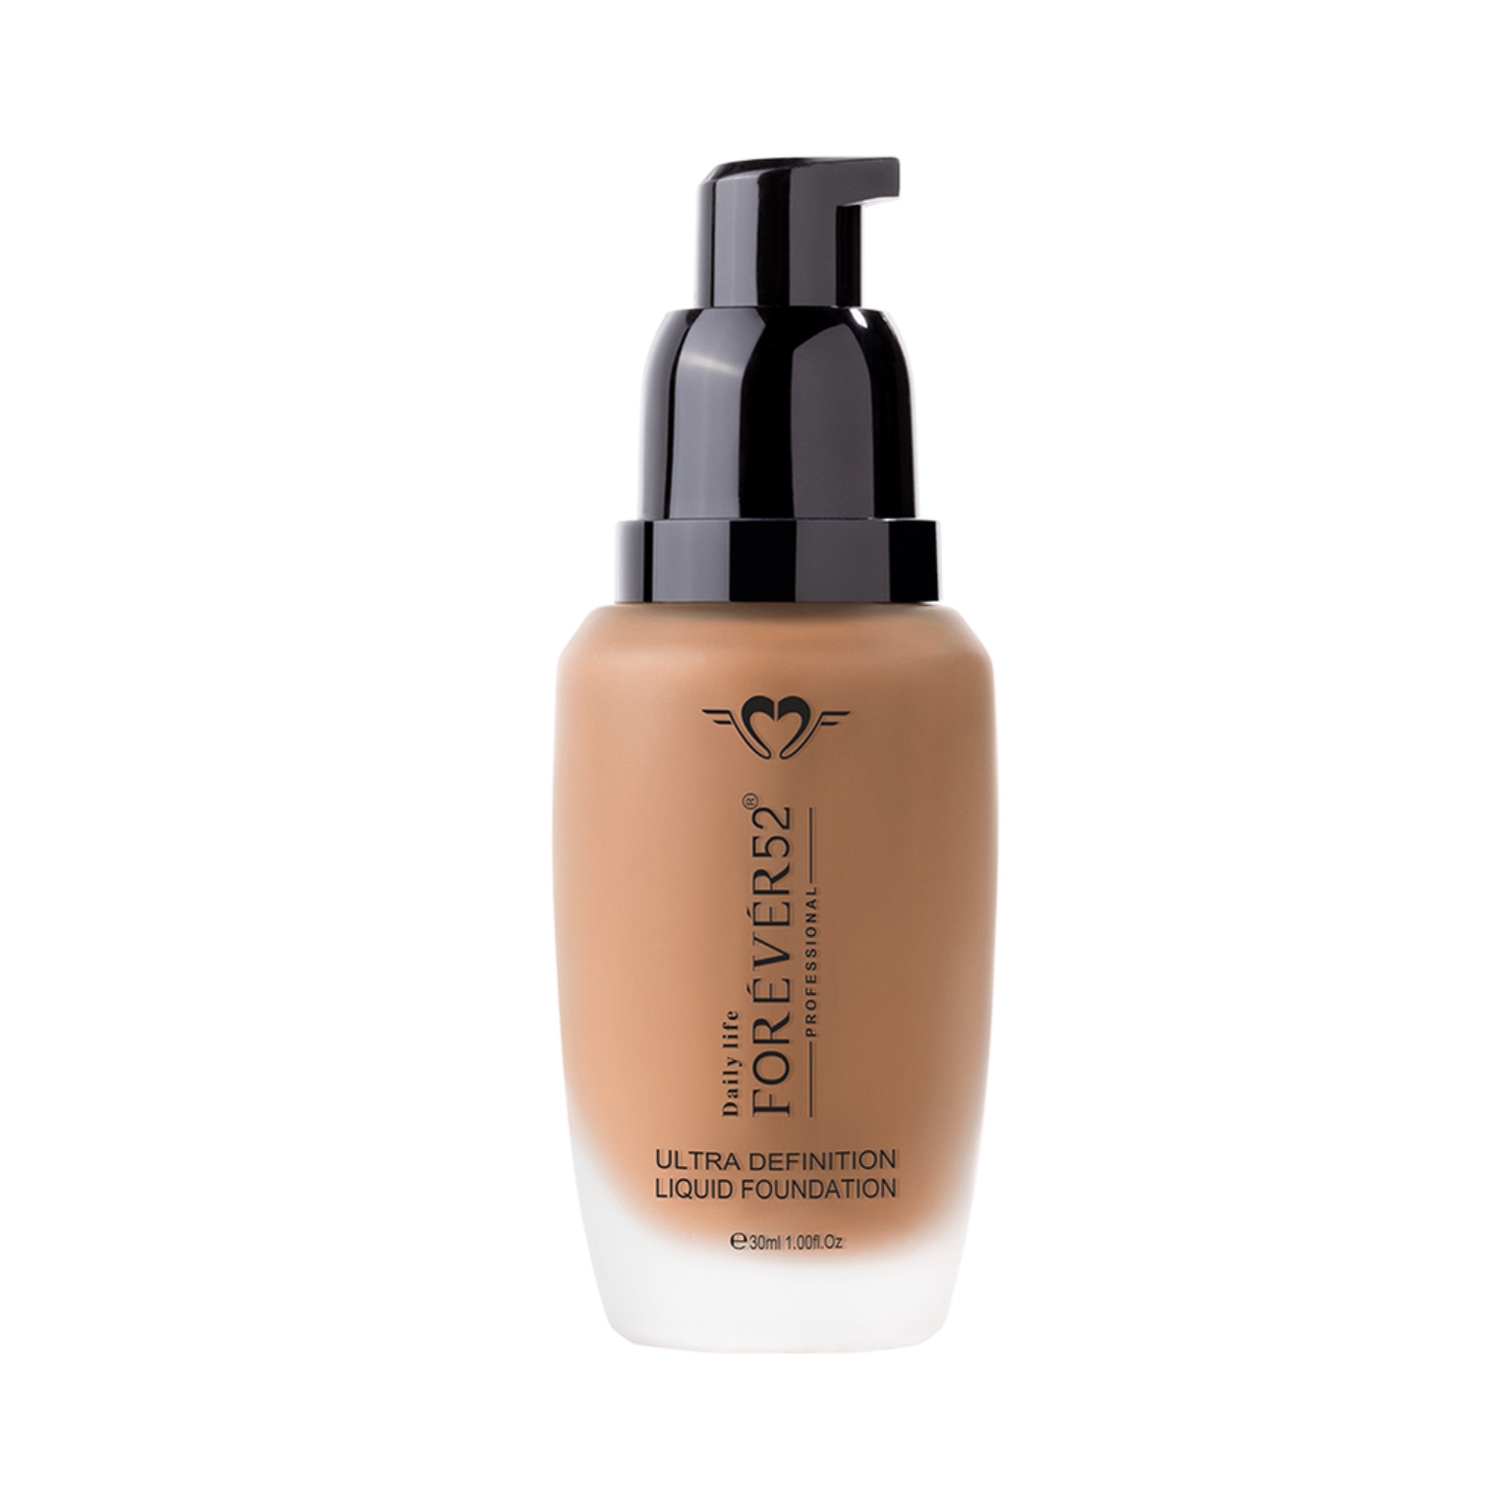 Daily Life Forever52 | Daily Life Forever52 Ultra Definition Liquid Foundation FLF002 - Eclair (30ml)